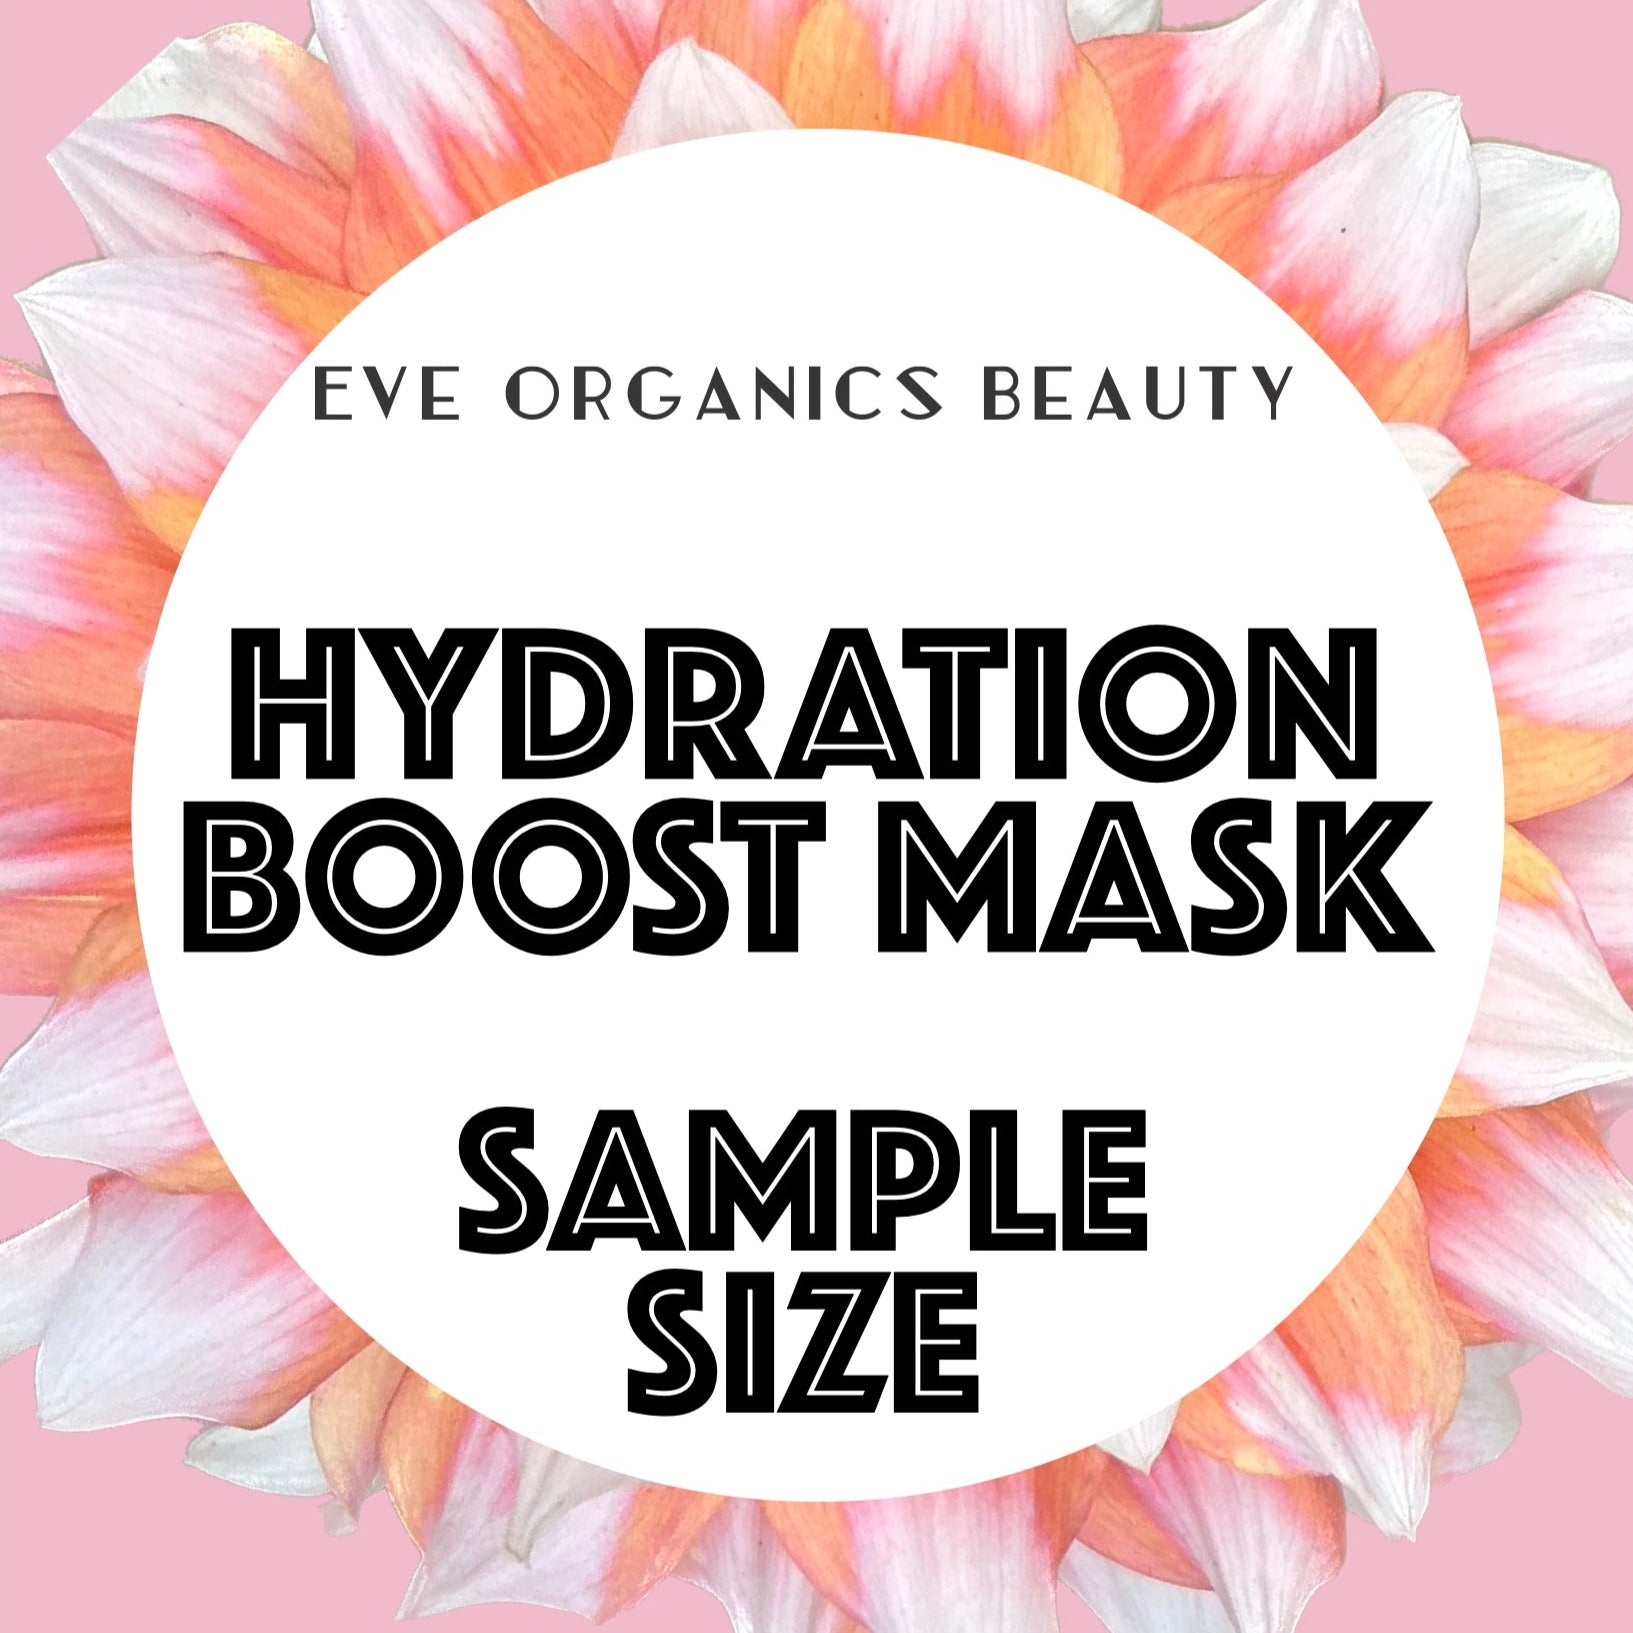 HYDRATION BOOST SAMPLE SIZE